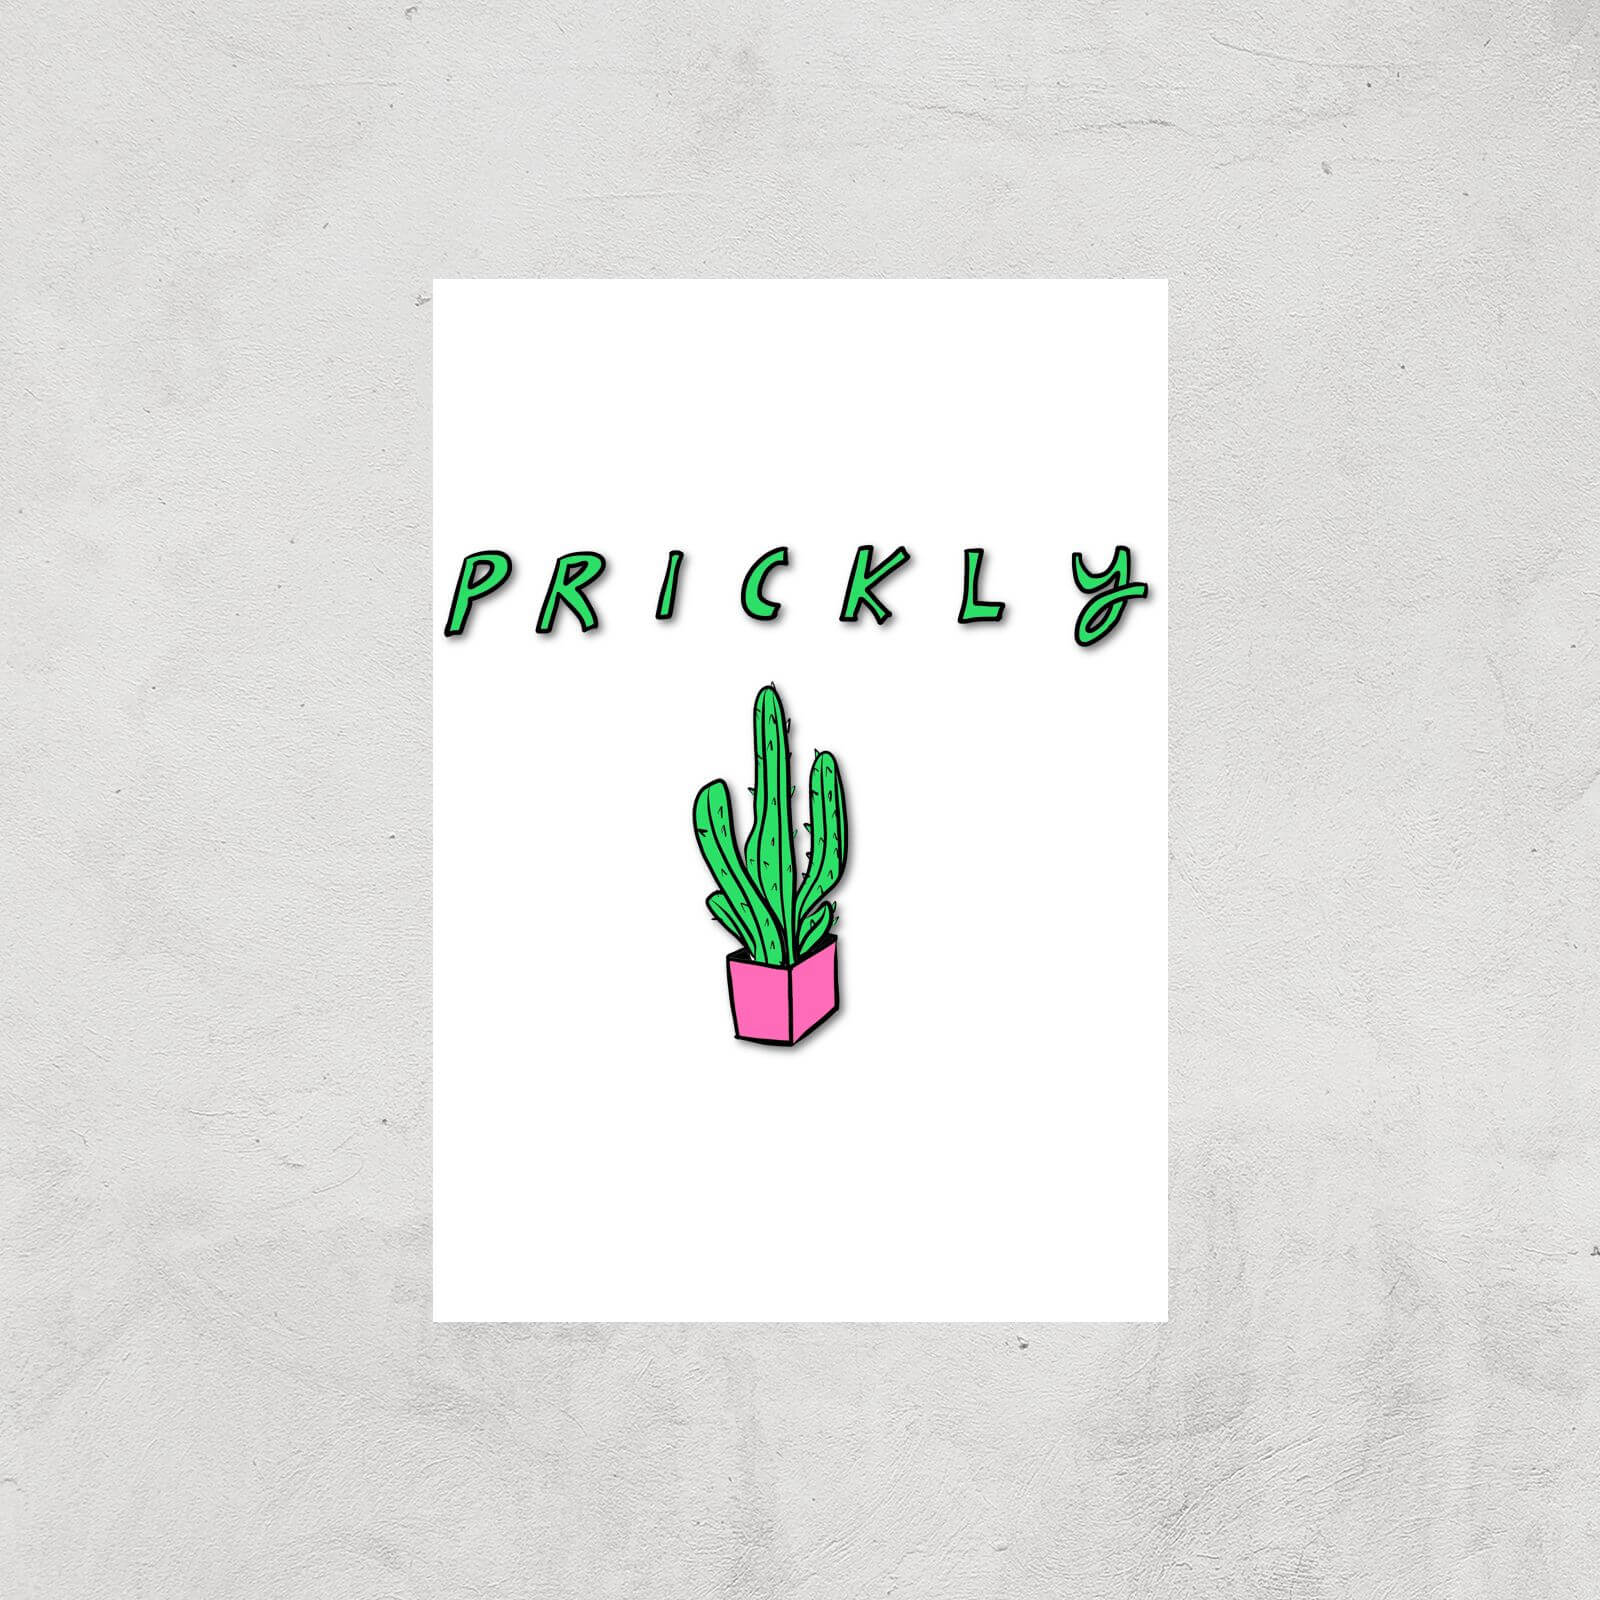 Rock On Ruby Prickly Art Print - A2 - Print Only